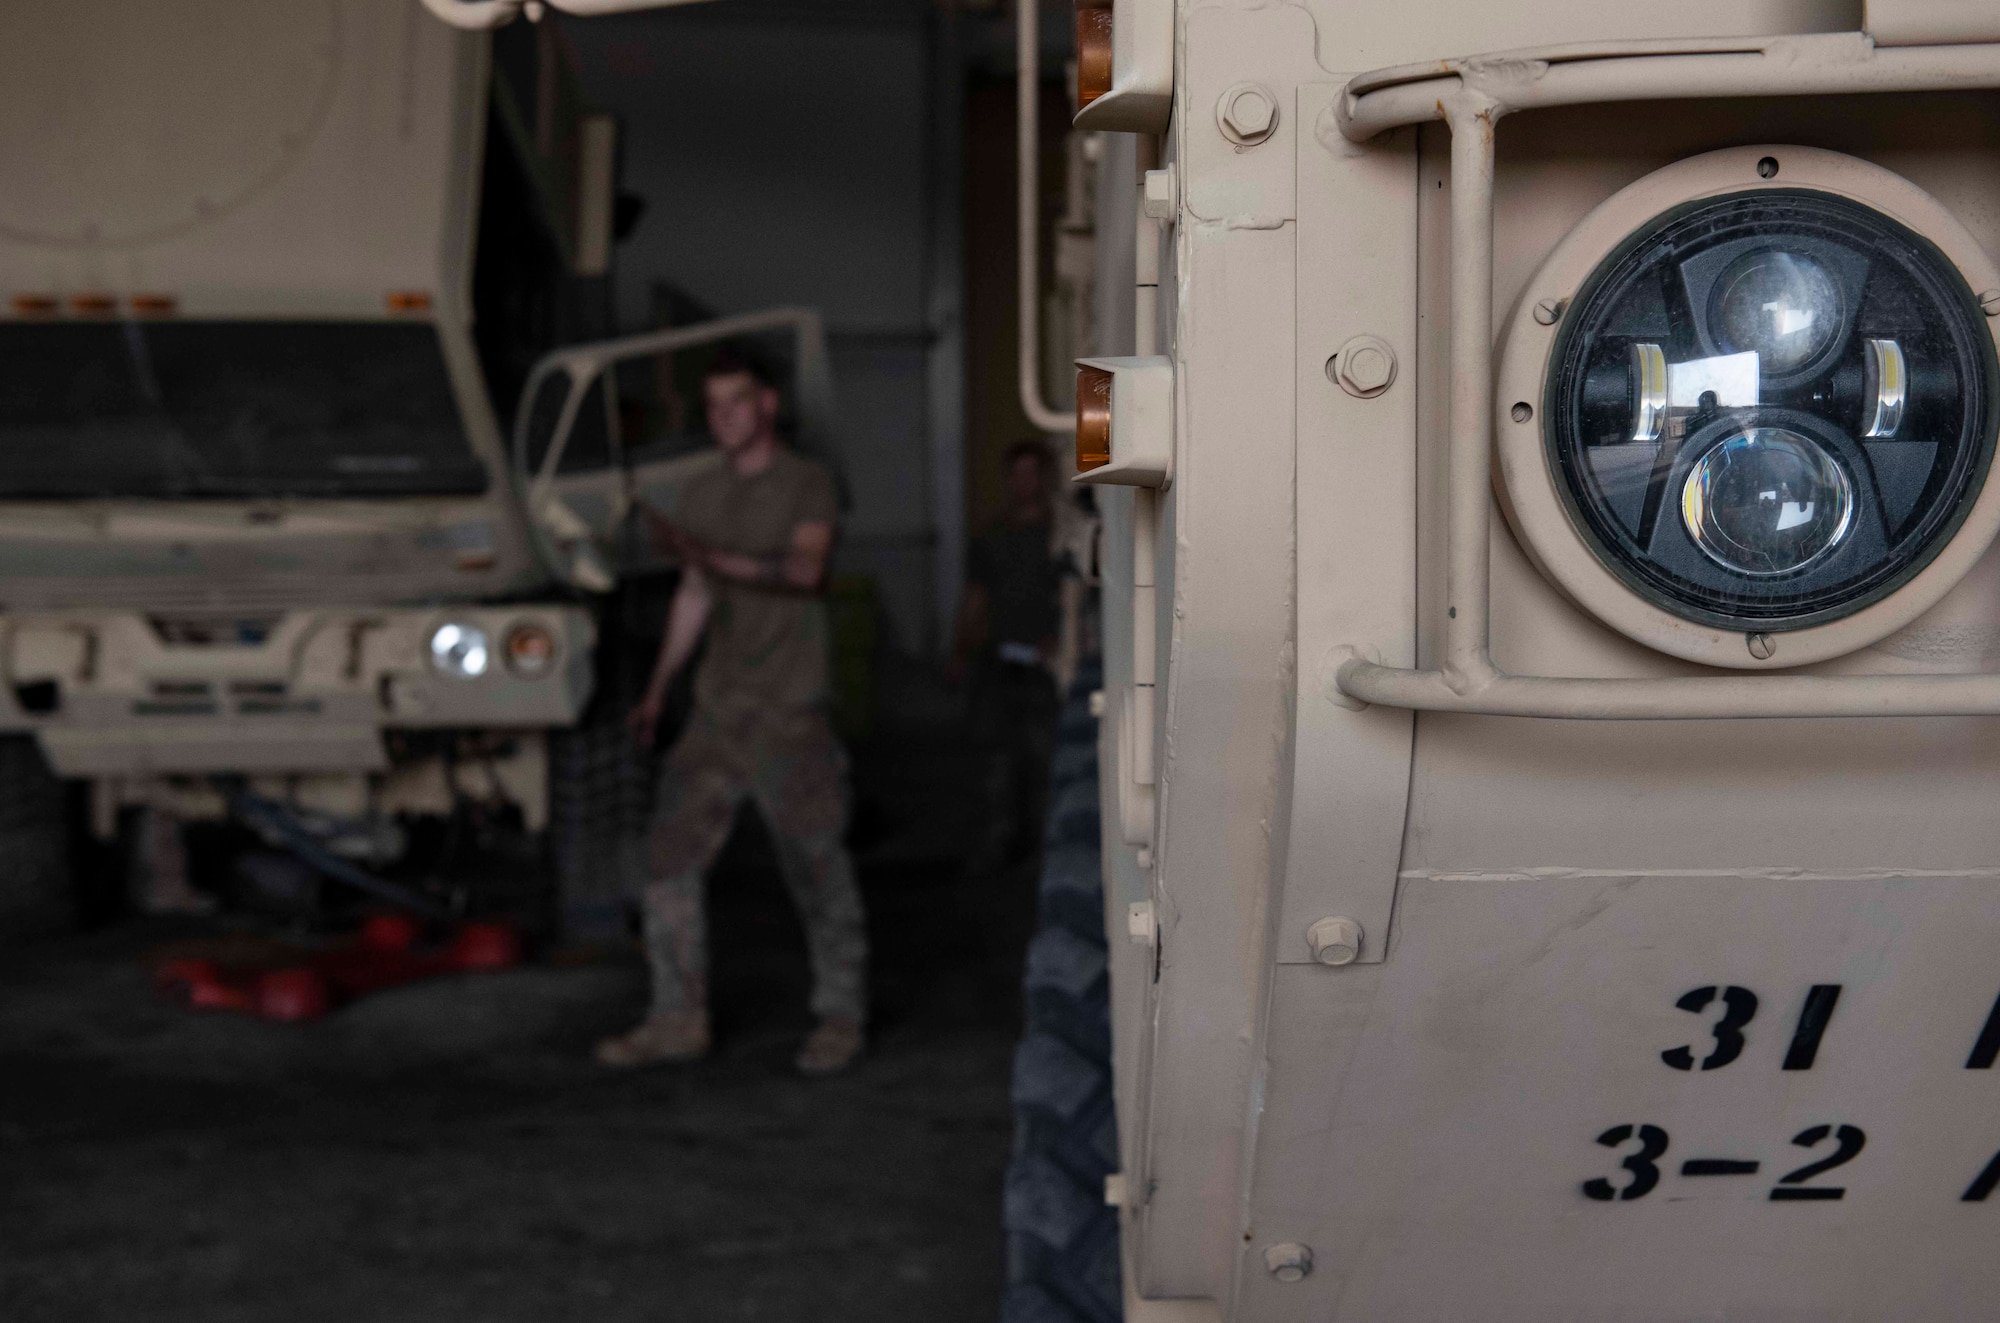 A U.S. Army Soldier assigned to Charlie Battery, 3rd Battalion, 2nd Air Defense Artillery Regiment works on an M1085A1 long-wheelbase truck engine at Ali Al Salem Air Base, Kuwait, Nov. 20, 2020. The truck provides tactical unit and cargo mobility and has a maximum payload capacity of 10,000 pounds. (U.S. Air Force photo by Staff Sgt. Kenneth Boyton)